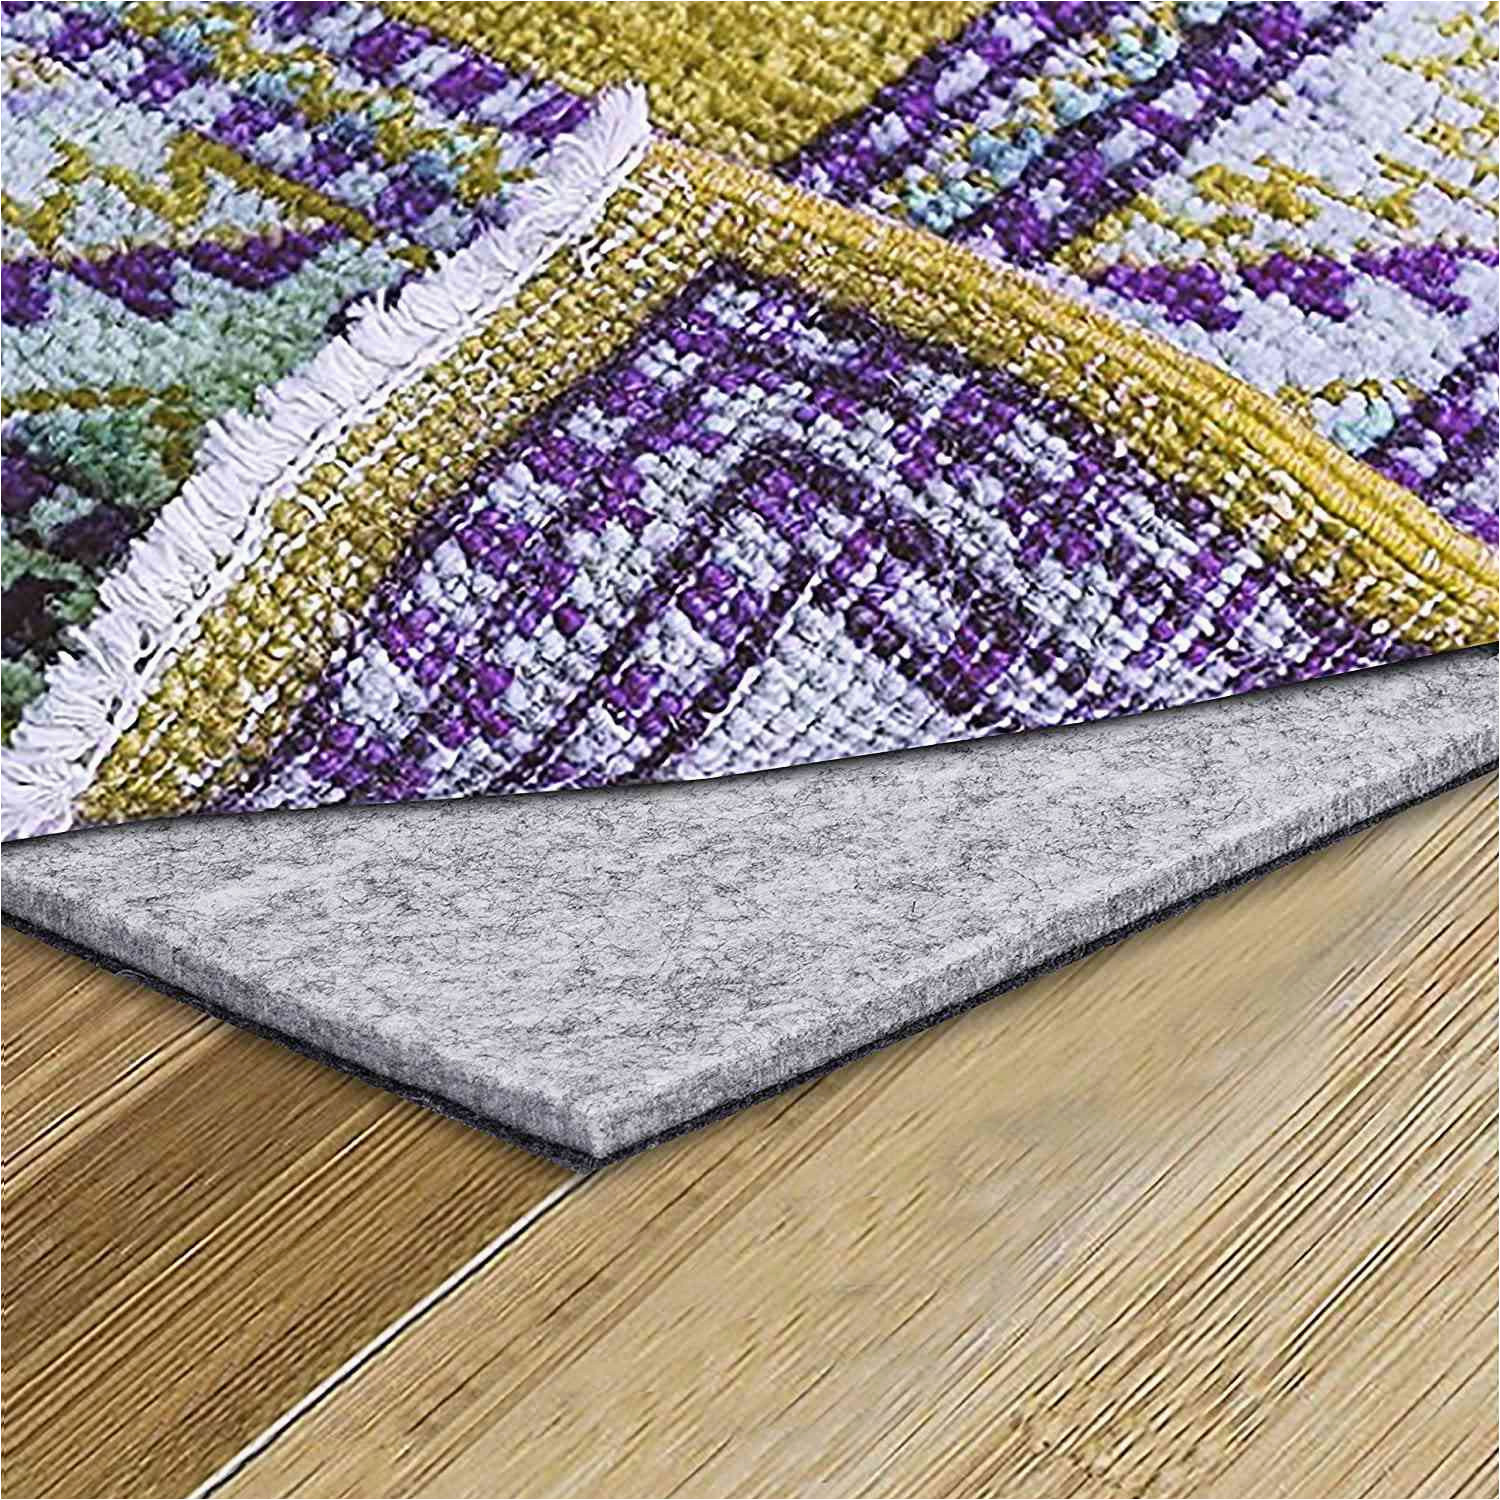 Best area Rug Pad for Wood Floors the 11 Best Rug Pads Of 2022 Tested by the Spruce